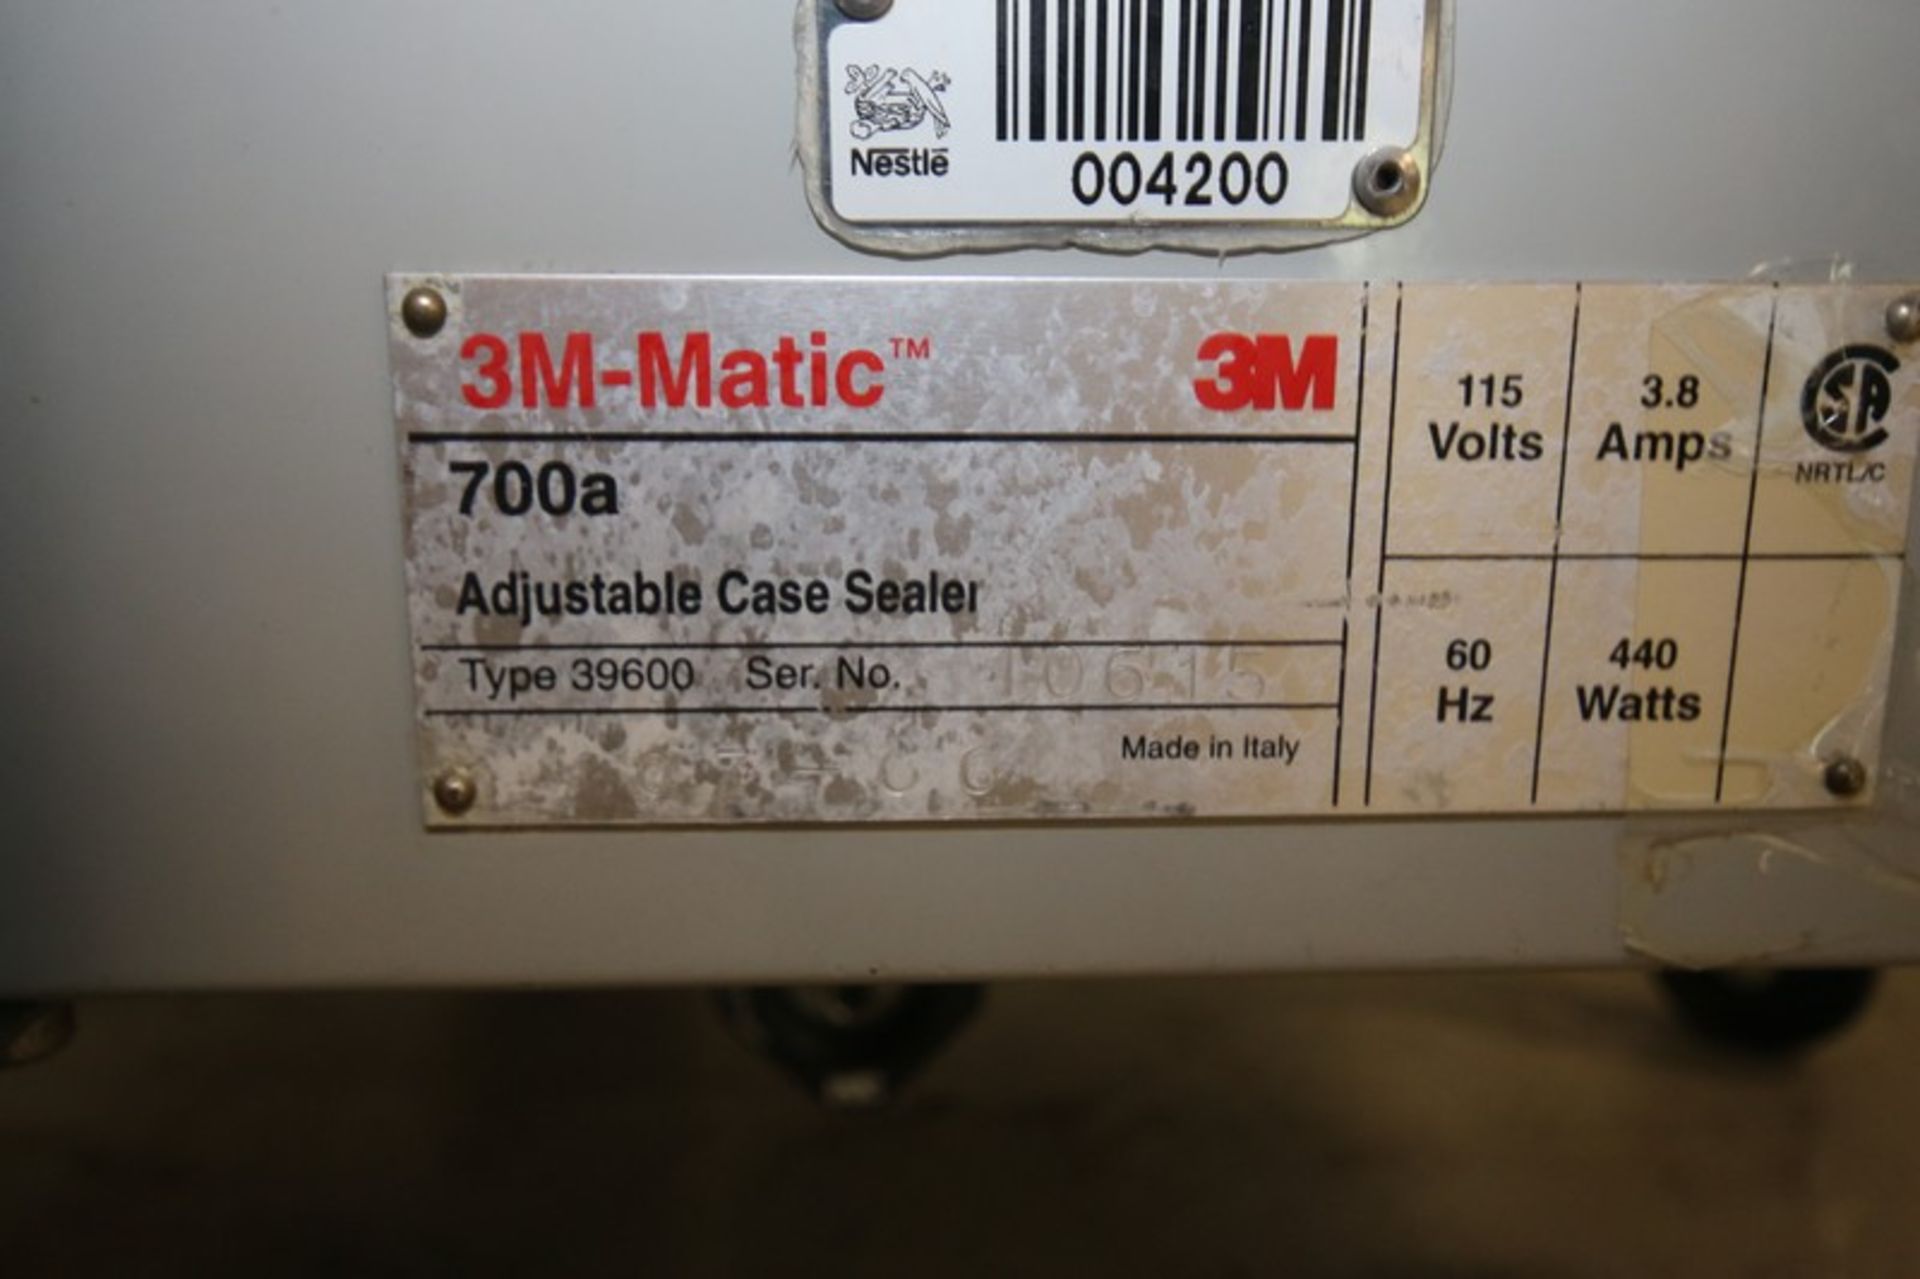 3M-Matic Adjustable Case Sealer, Series 700A, Type: 39600, SN 10615, Includes Bottom Cartridge, 115V - Image 5 of 6